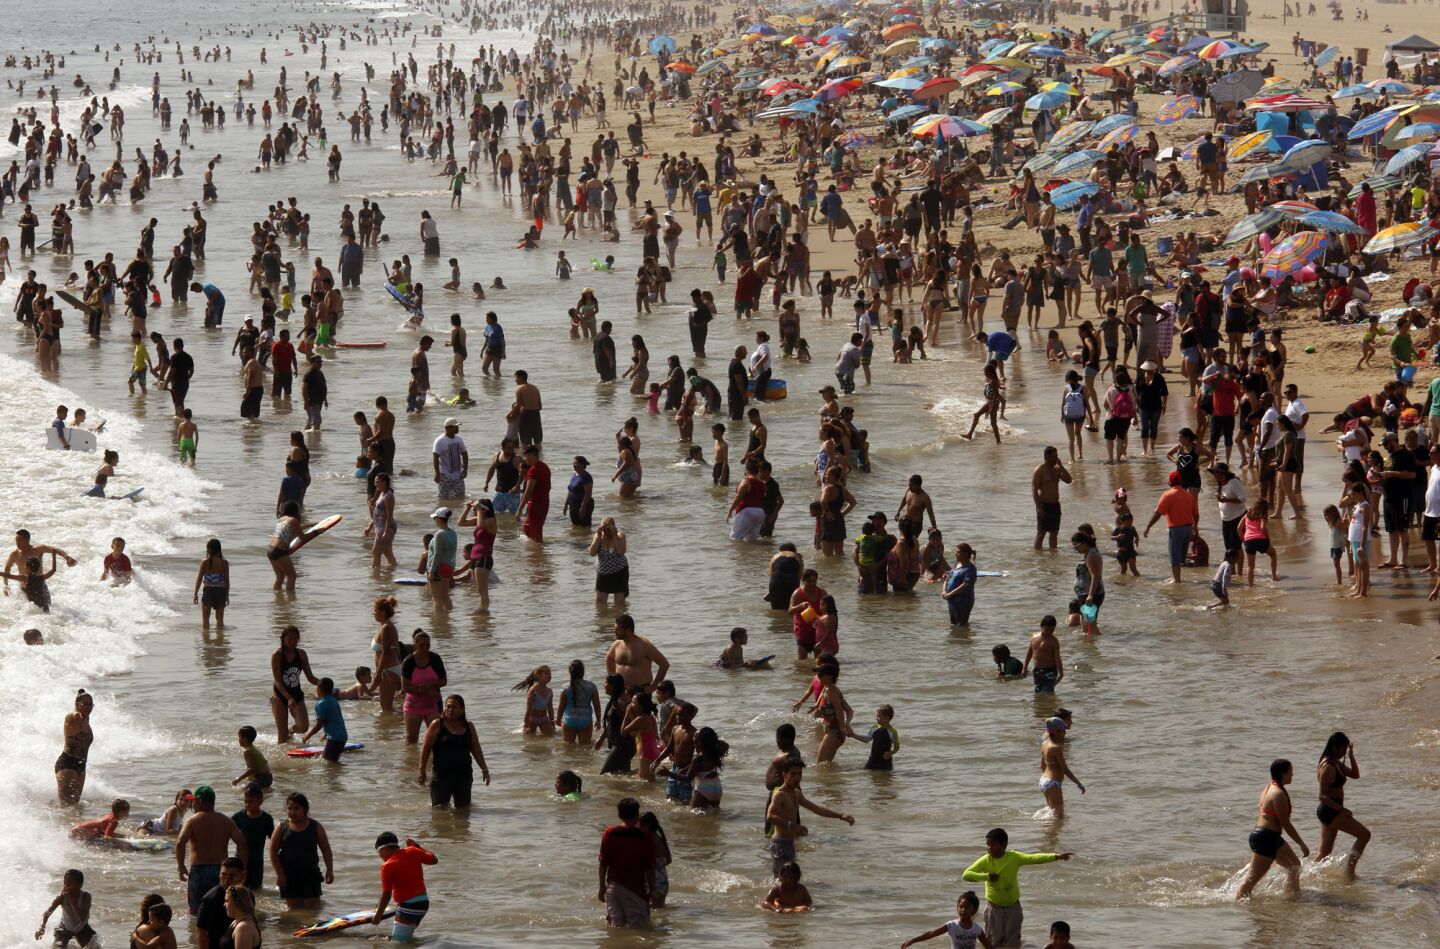 Hundreds of people seek relief from the hot weather Sunday near the Santa Monica Pier.